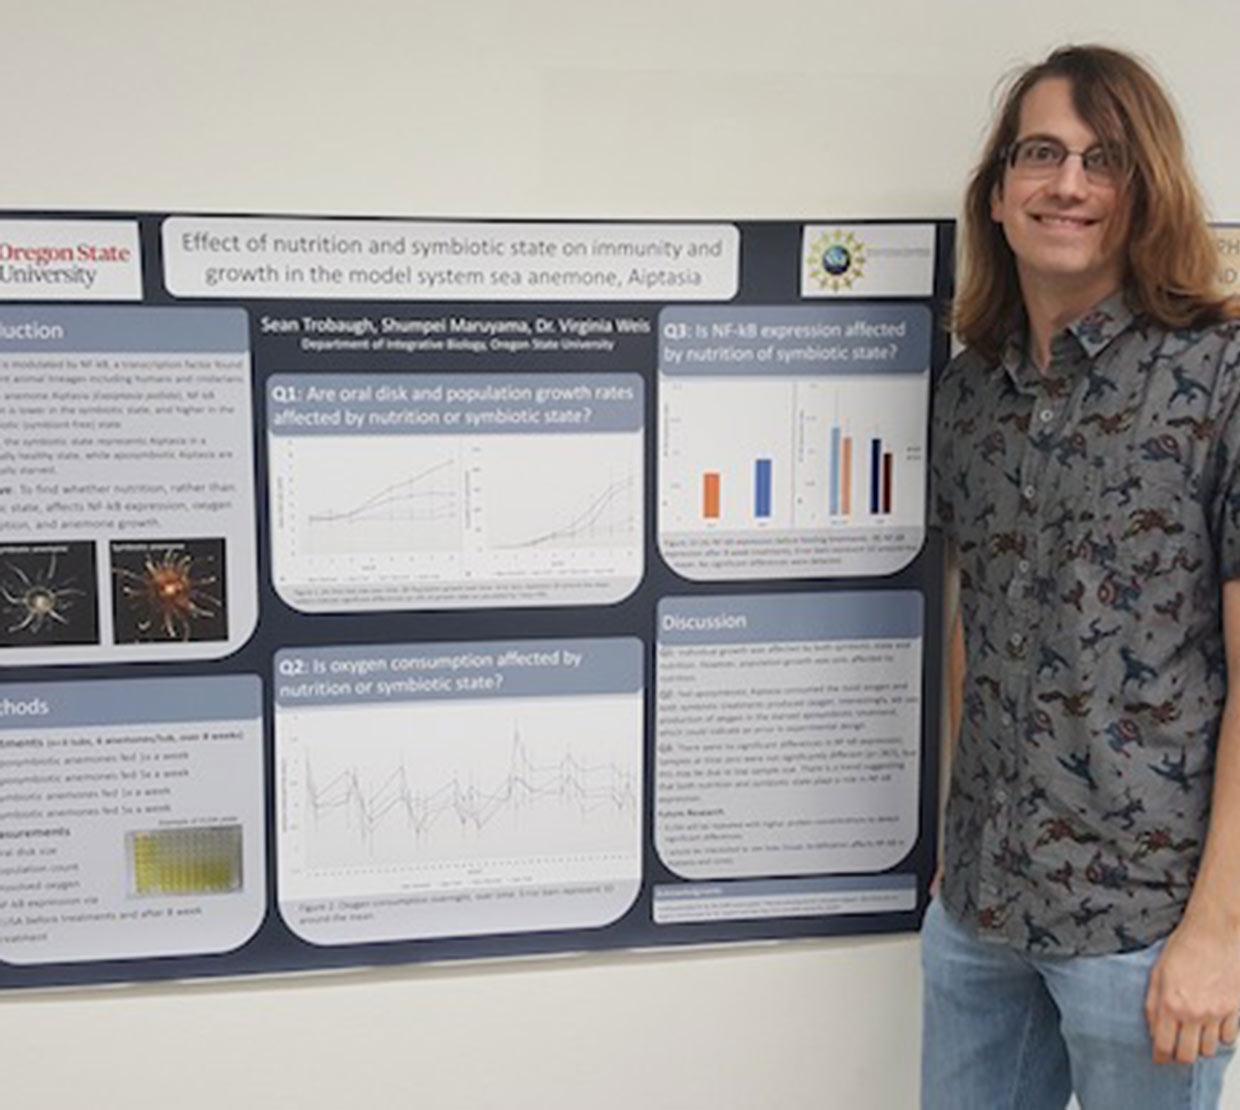 Sean Trobaugh in front of research poster